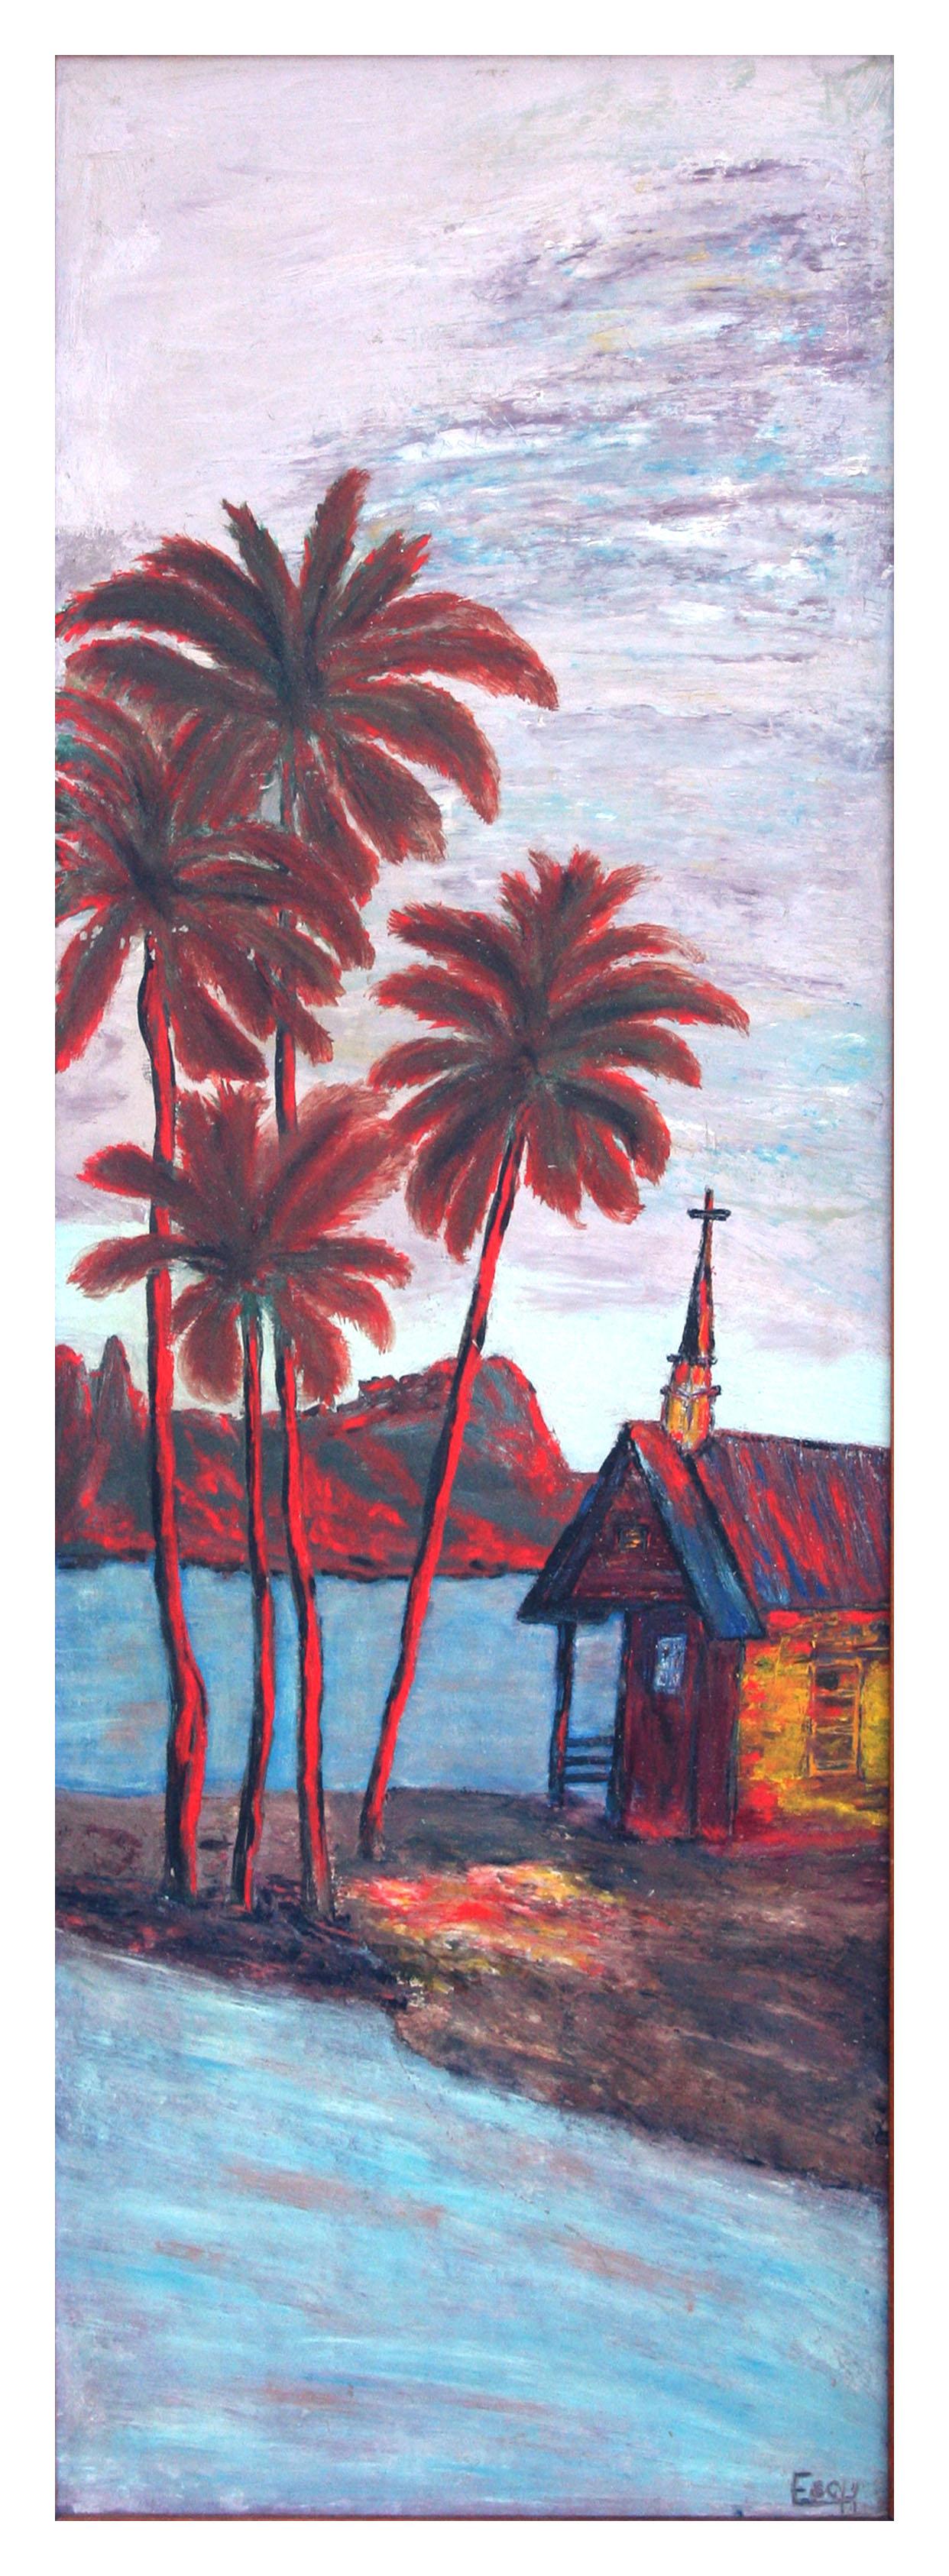 The Island Chapel - Painting by Esch